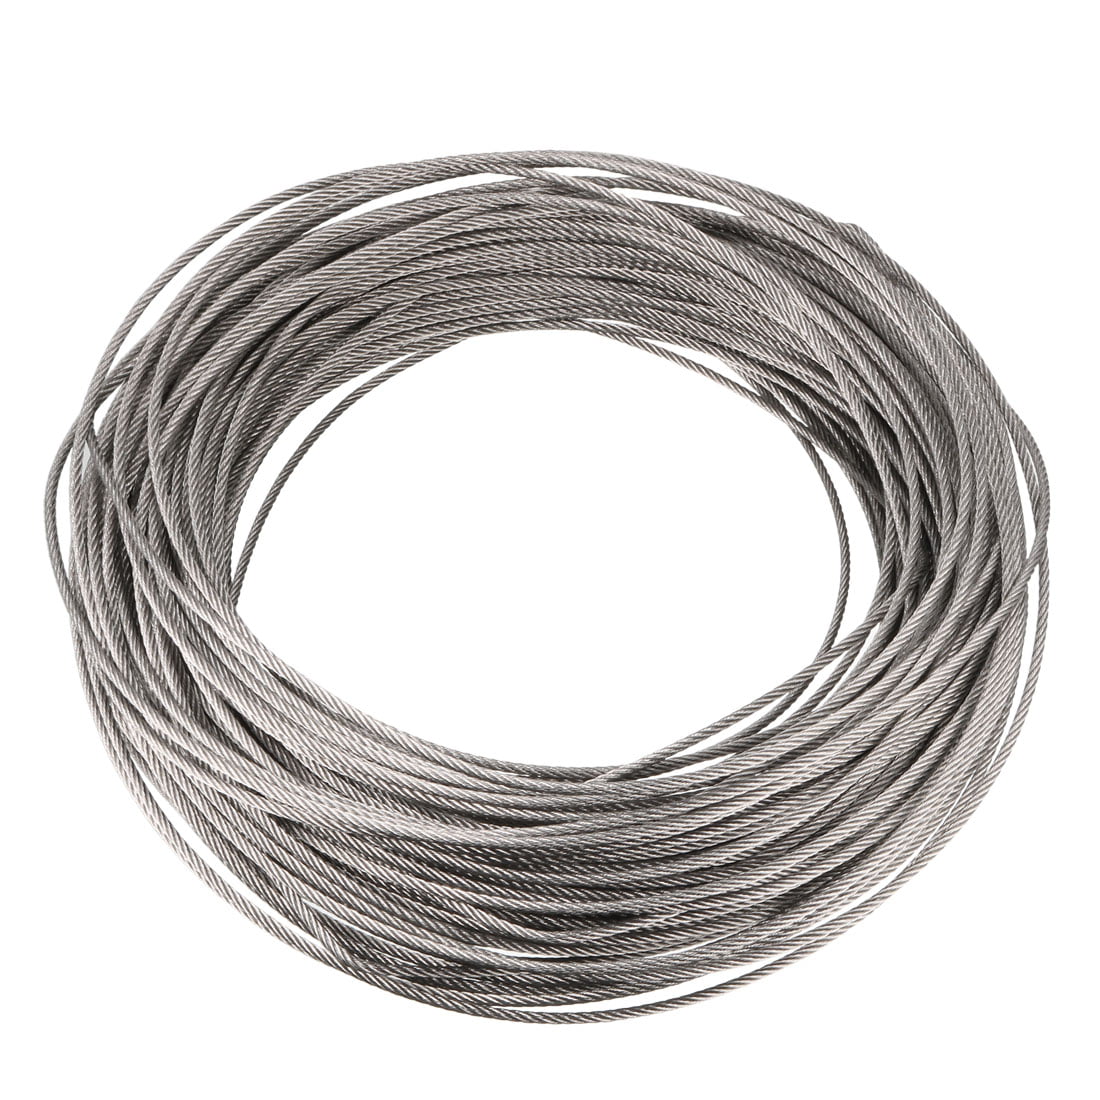 Pandahall Elite 20 Gauge 304 Stainless Steel Wire Rope 328 Ft